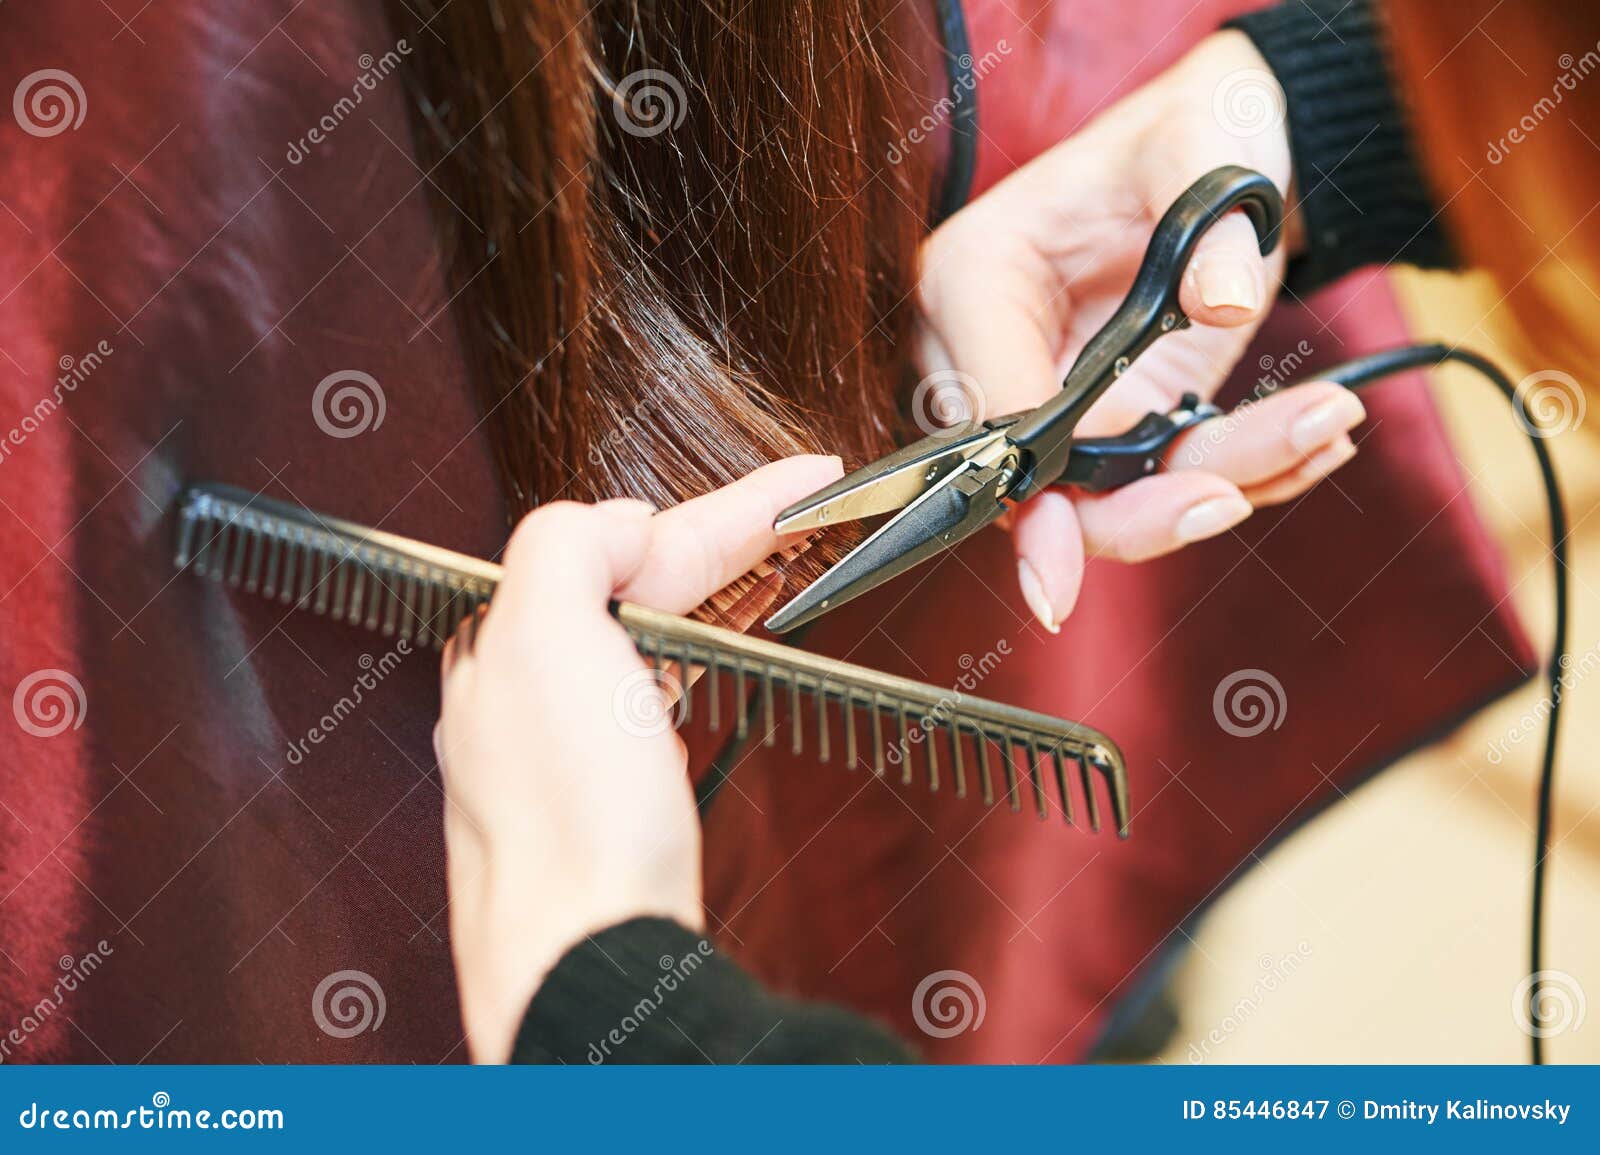 hands of professional hair stylist with scissors and comb